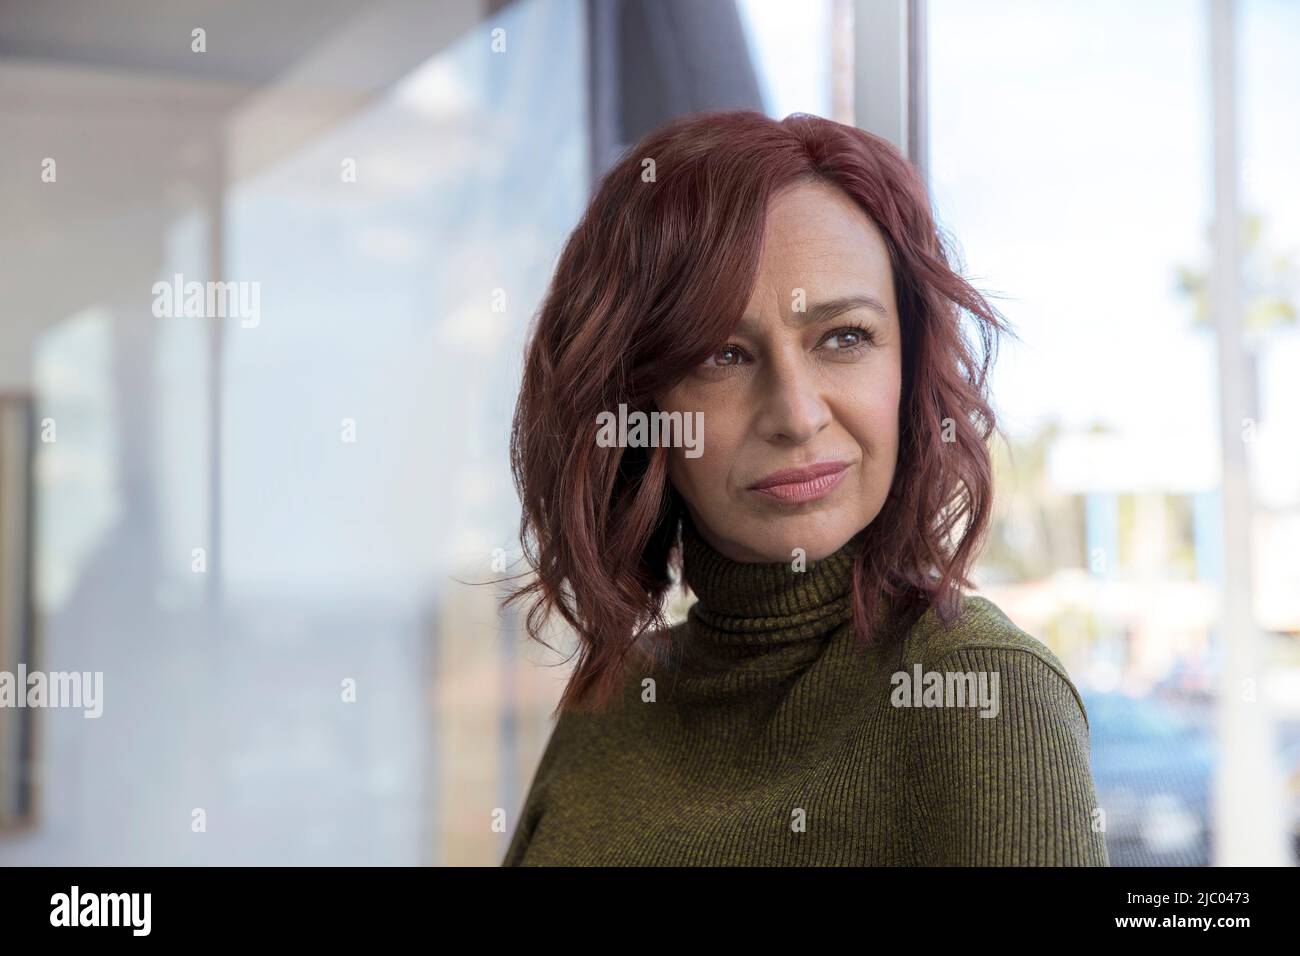 Mature woman with red hair, her back towards window, looks off frame. Stock Photo